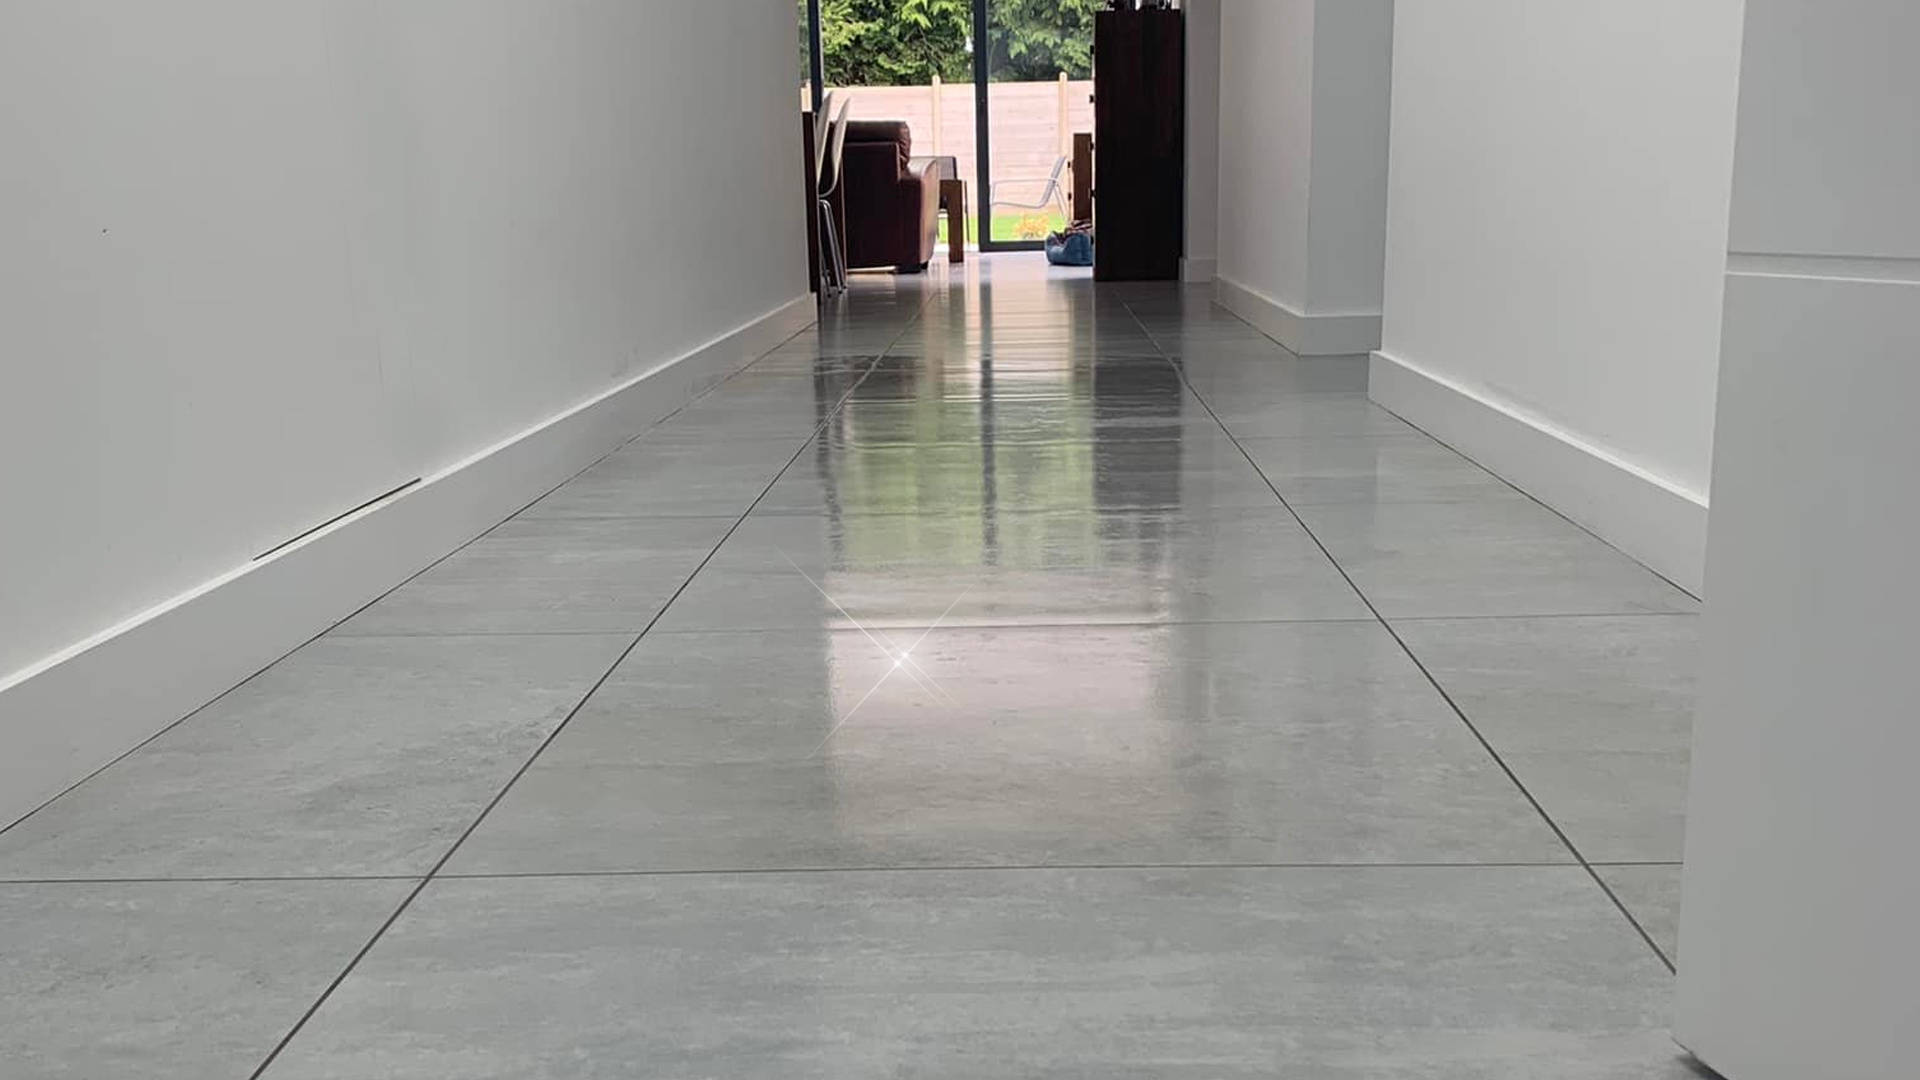  Ultra Clean Gallery Pics |  Telephone: 07488 361 604 | Email:ultra.clean021@gmail.com